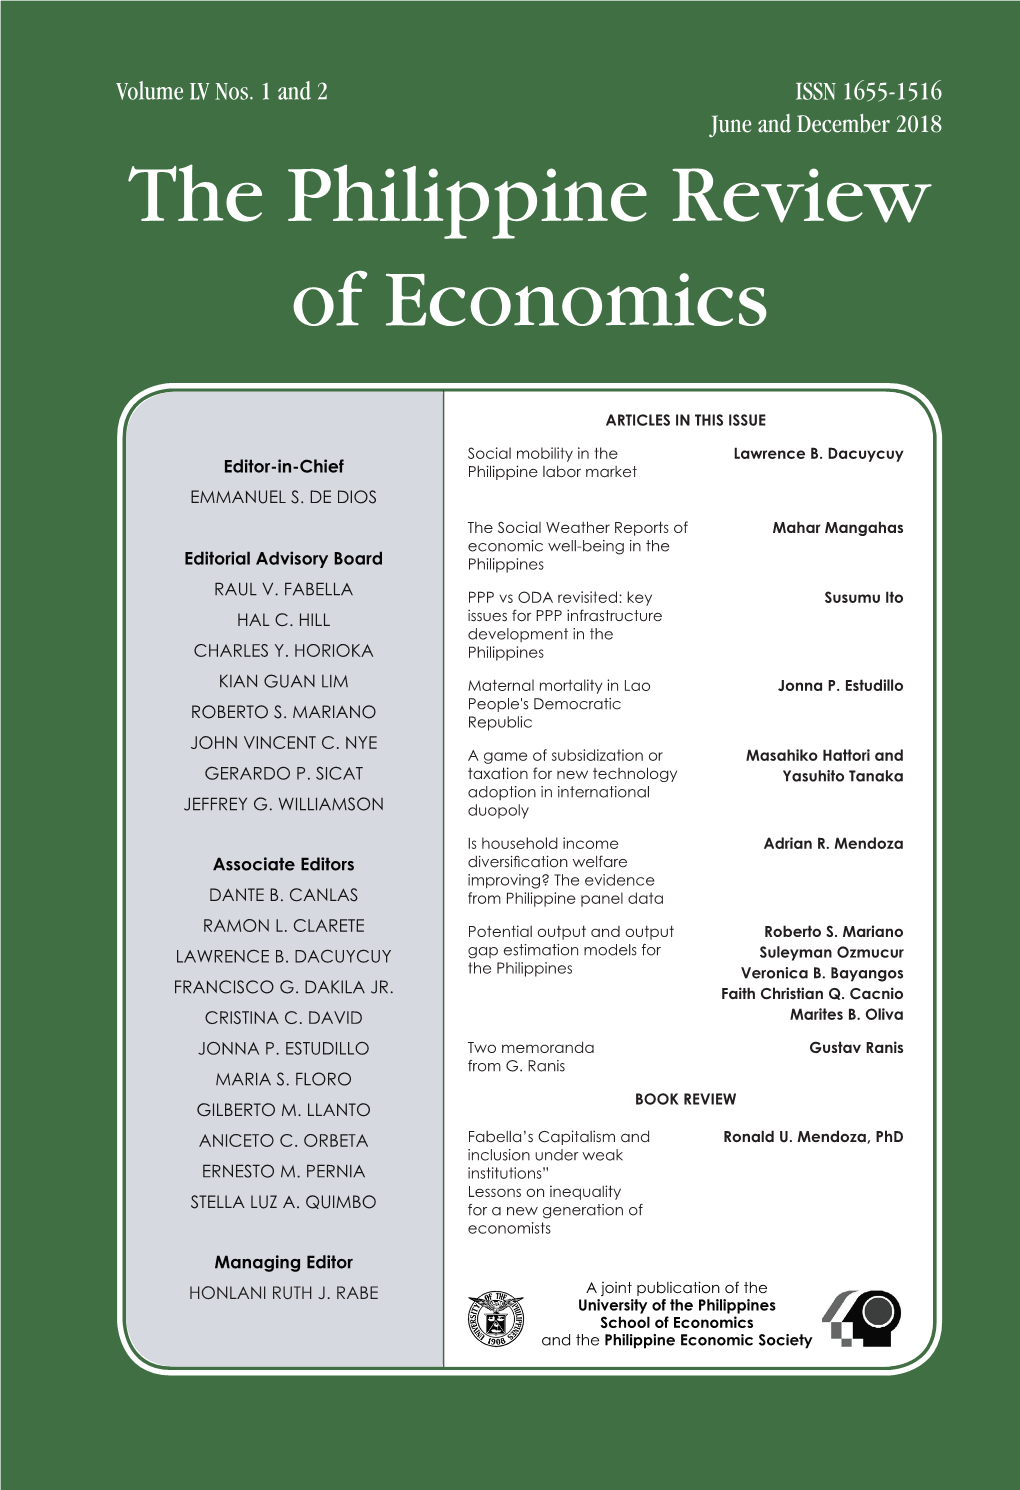 THE PHILIPPINE REVIEW of ECONOMICS the PHILIPPINE REVIEW of ECONOMICS Volume LIV No